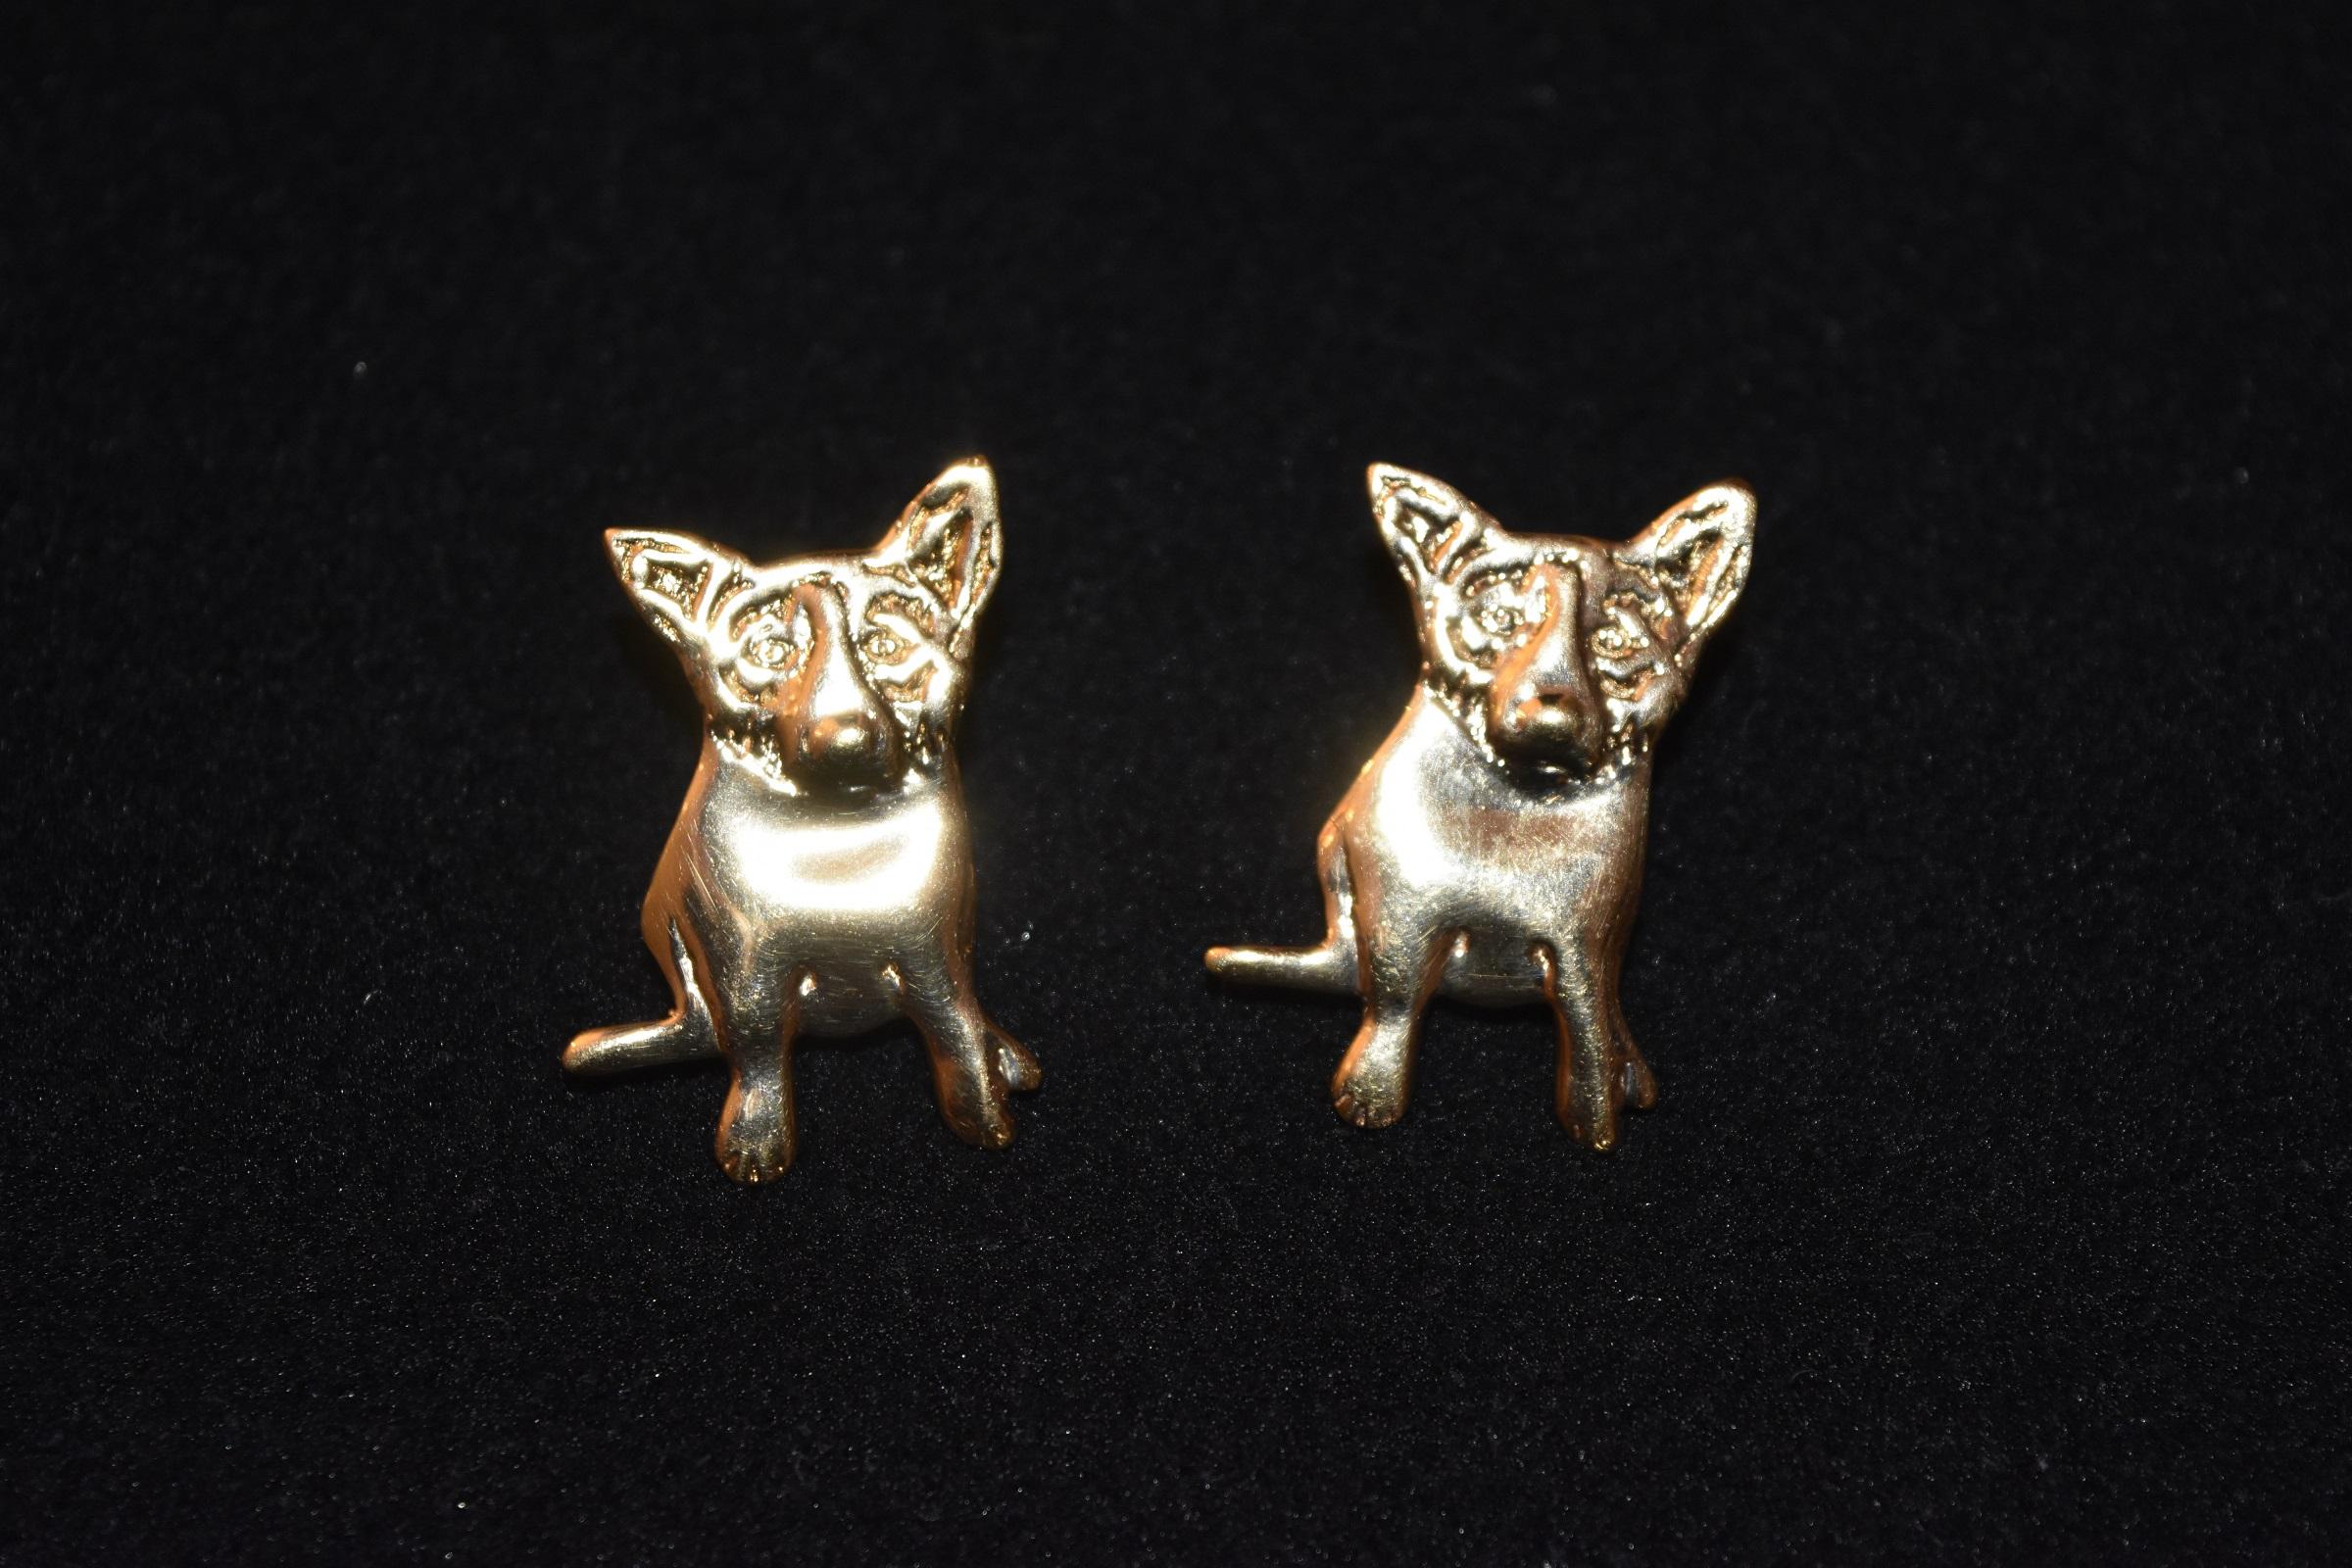 Blue Dog Sterling/Gold Plated Pierced Earrings w/@Rodrigue & "Sterling" on back